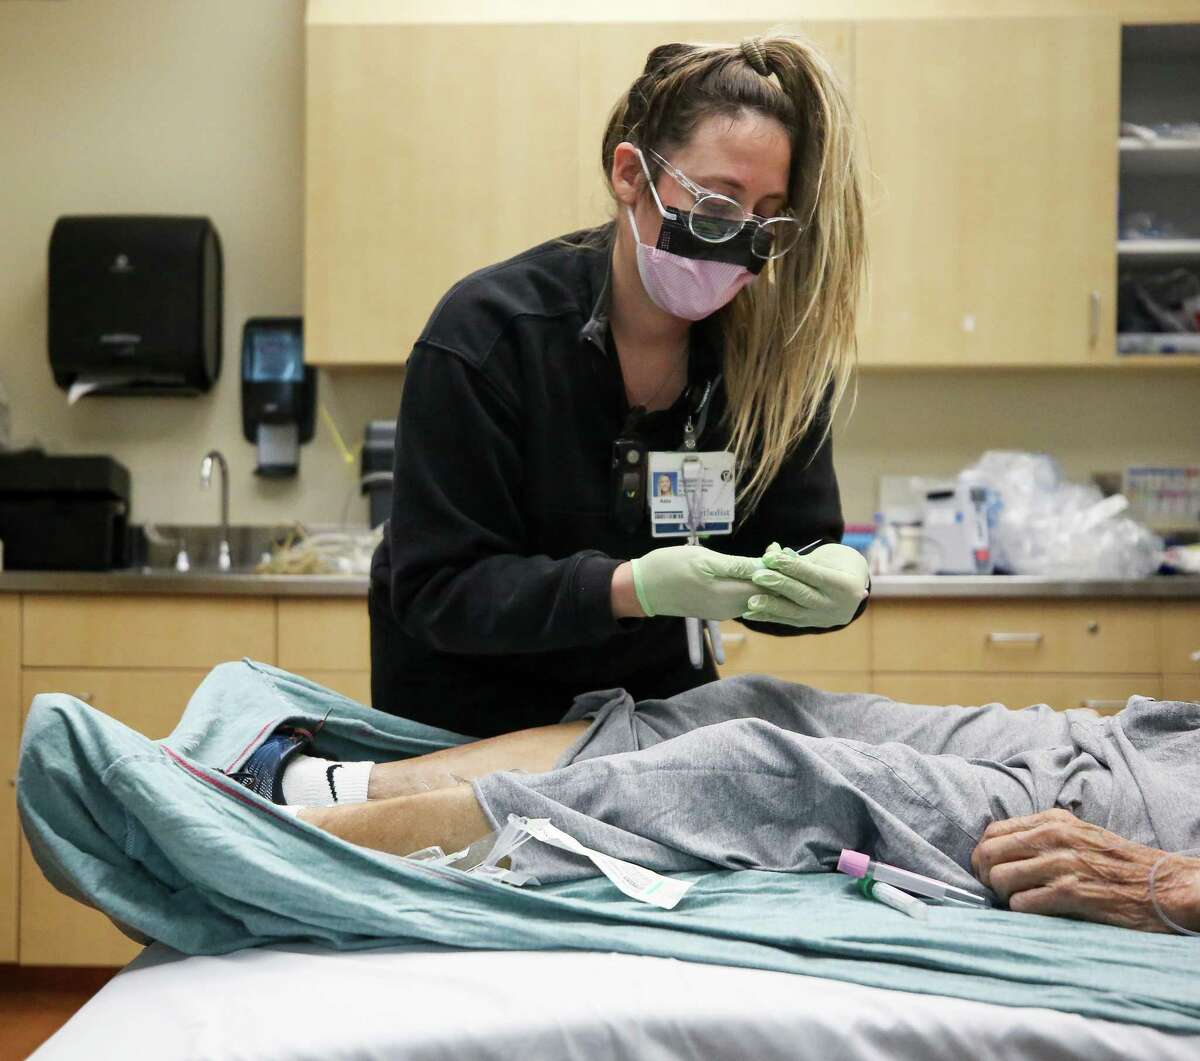 Registered nurse Kate Boback checks in on a patient who had just been brought into the Emergency Department by Houston Fire paramedics at Houston Methodist Hospital on Tuesday, Dec. 21, 2021, in Houston.